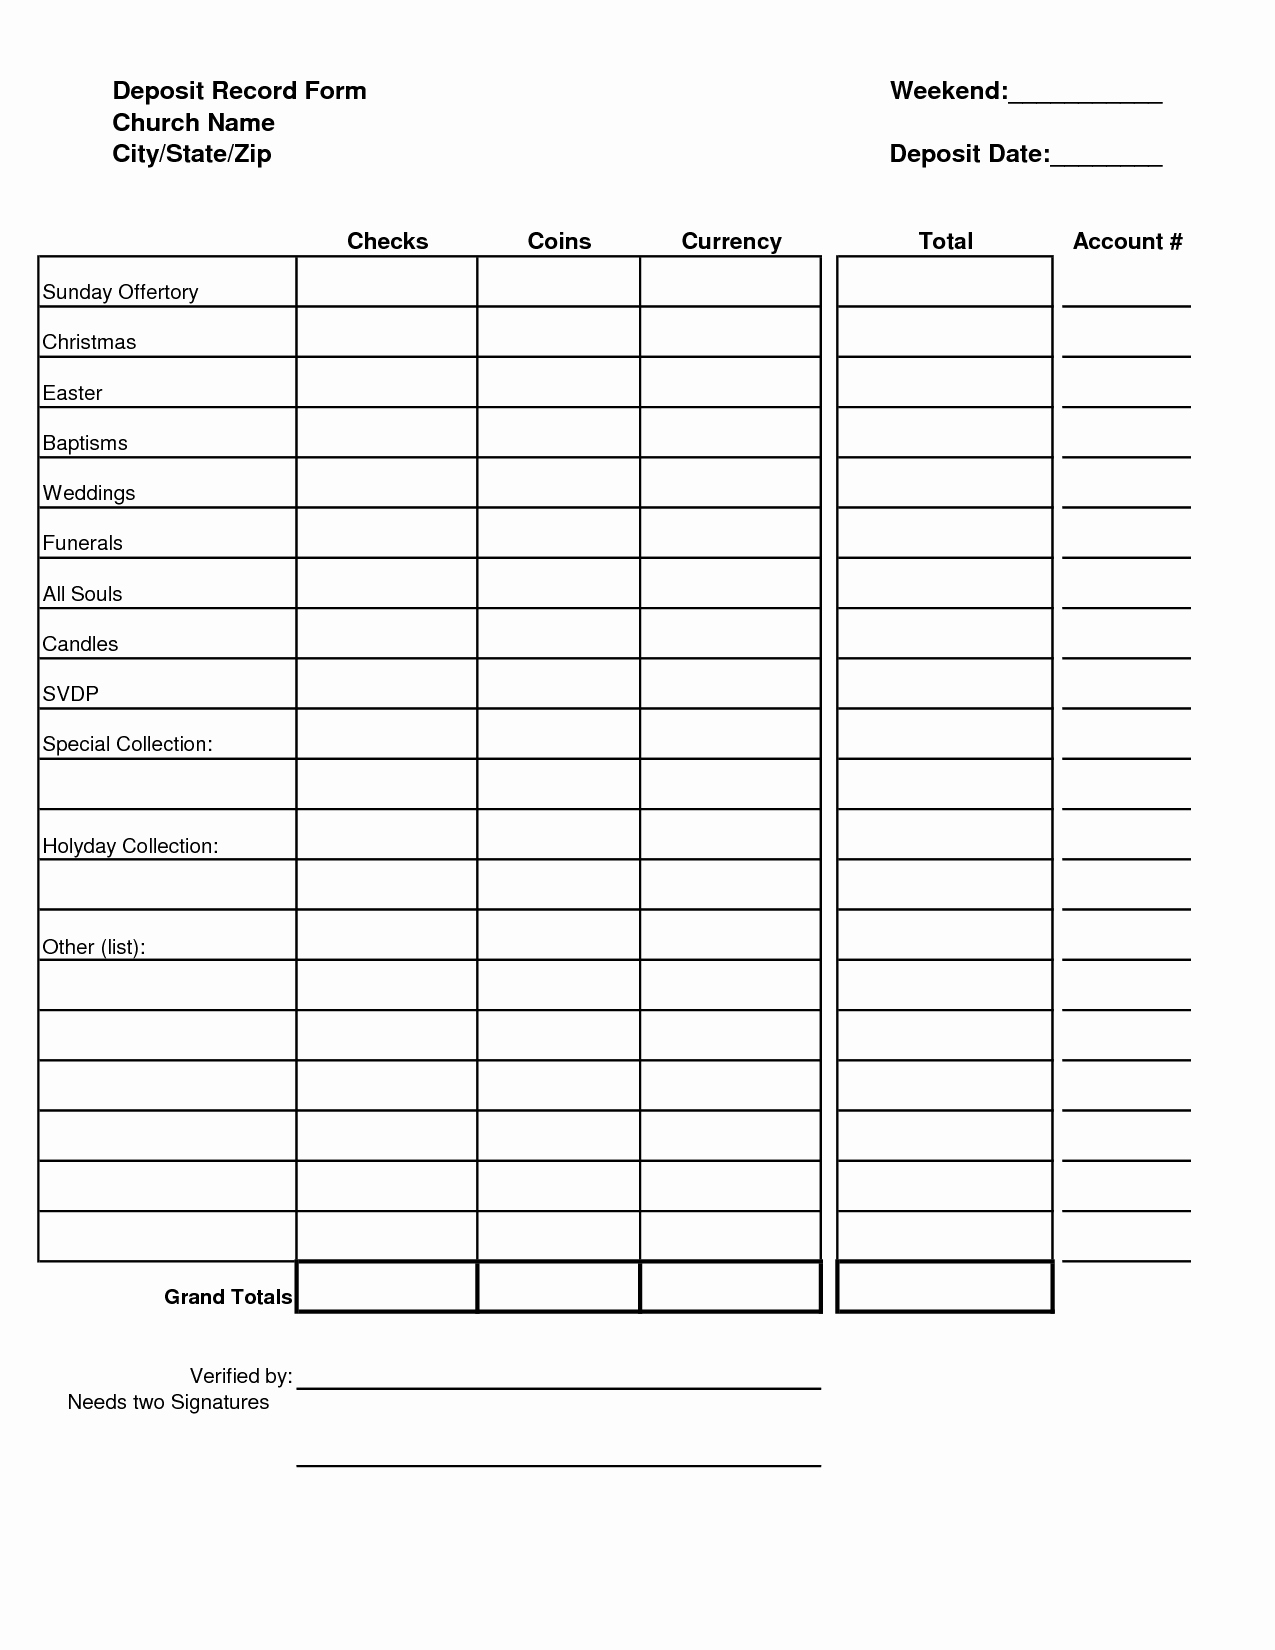 Daily Cash Sheet Template Excel New Best S Of Cash Count Sheet Excel Cash Drawer Count